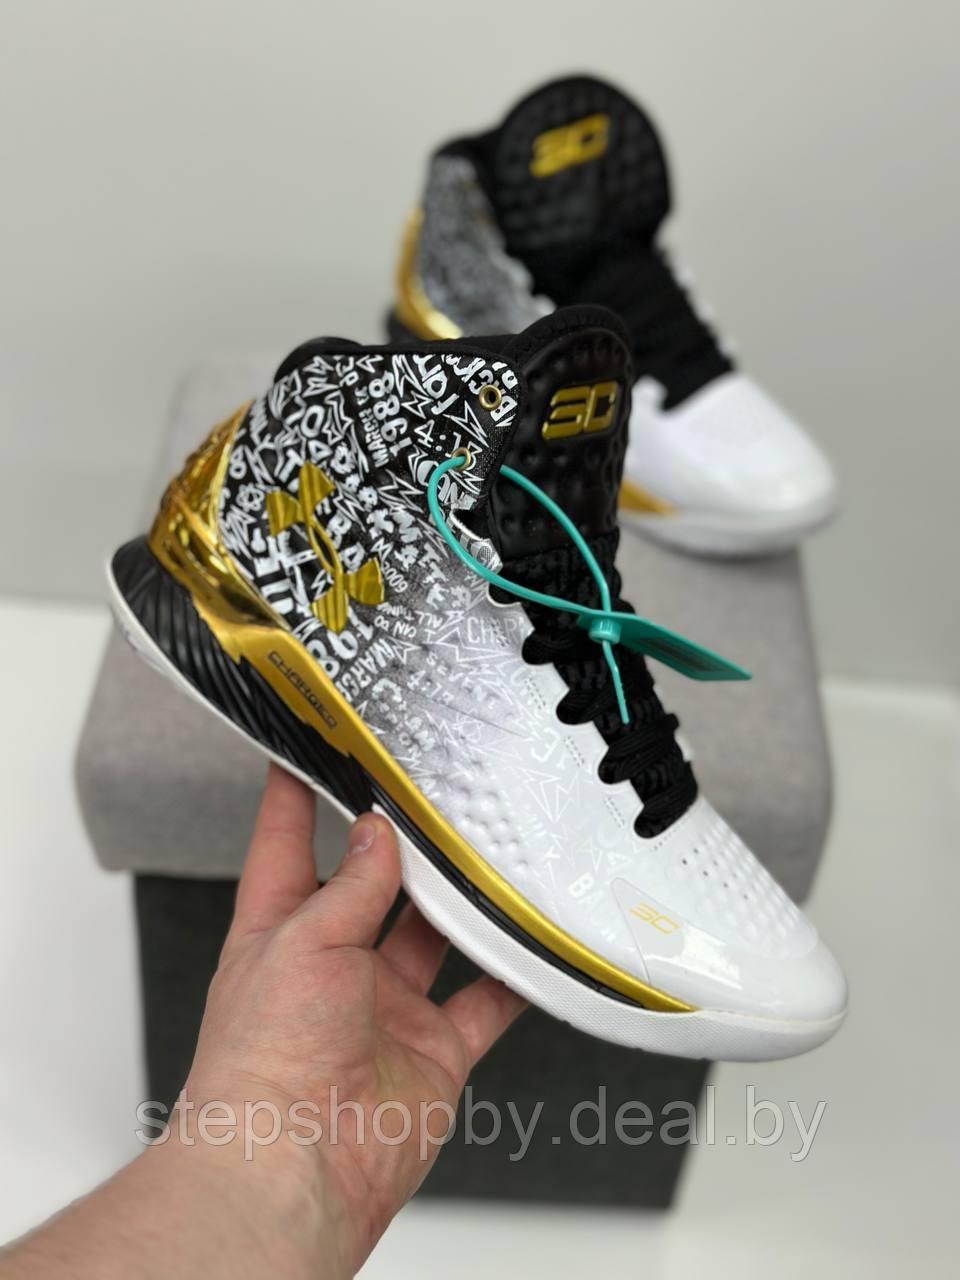 КРОССОВКИ UNDER ARMOUR UNDER ARMOUR CURRY 1 RETRO BACK TO BACK MVP 2021 45 - фото 1 - id-p225960508